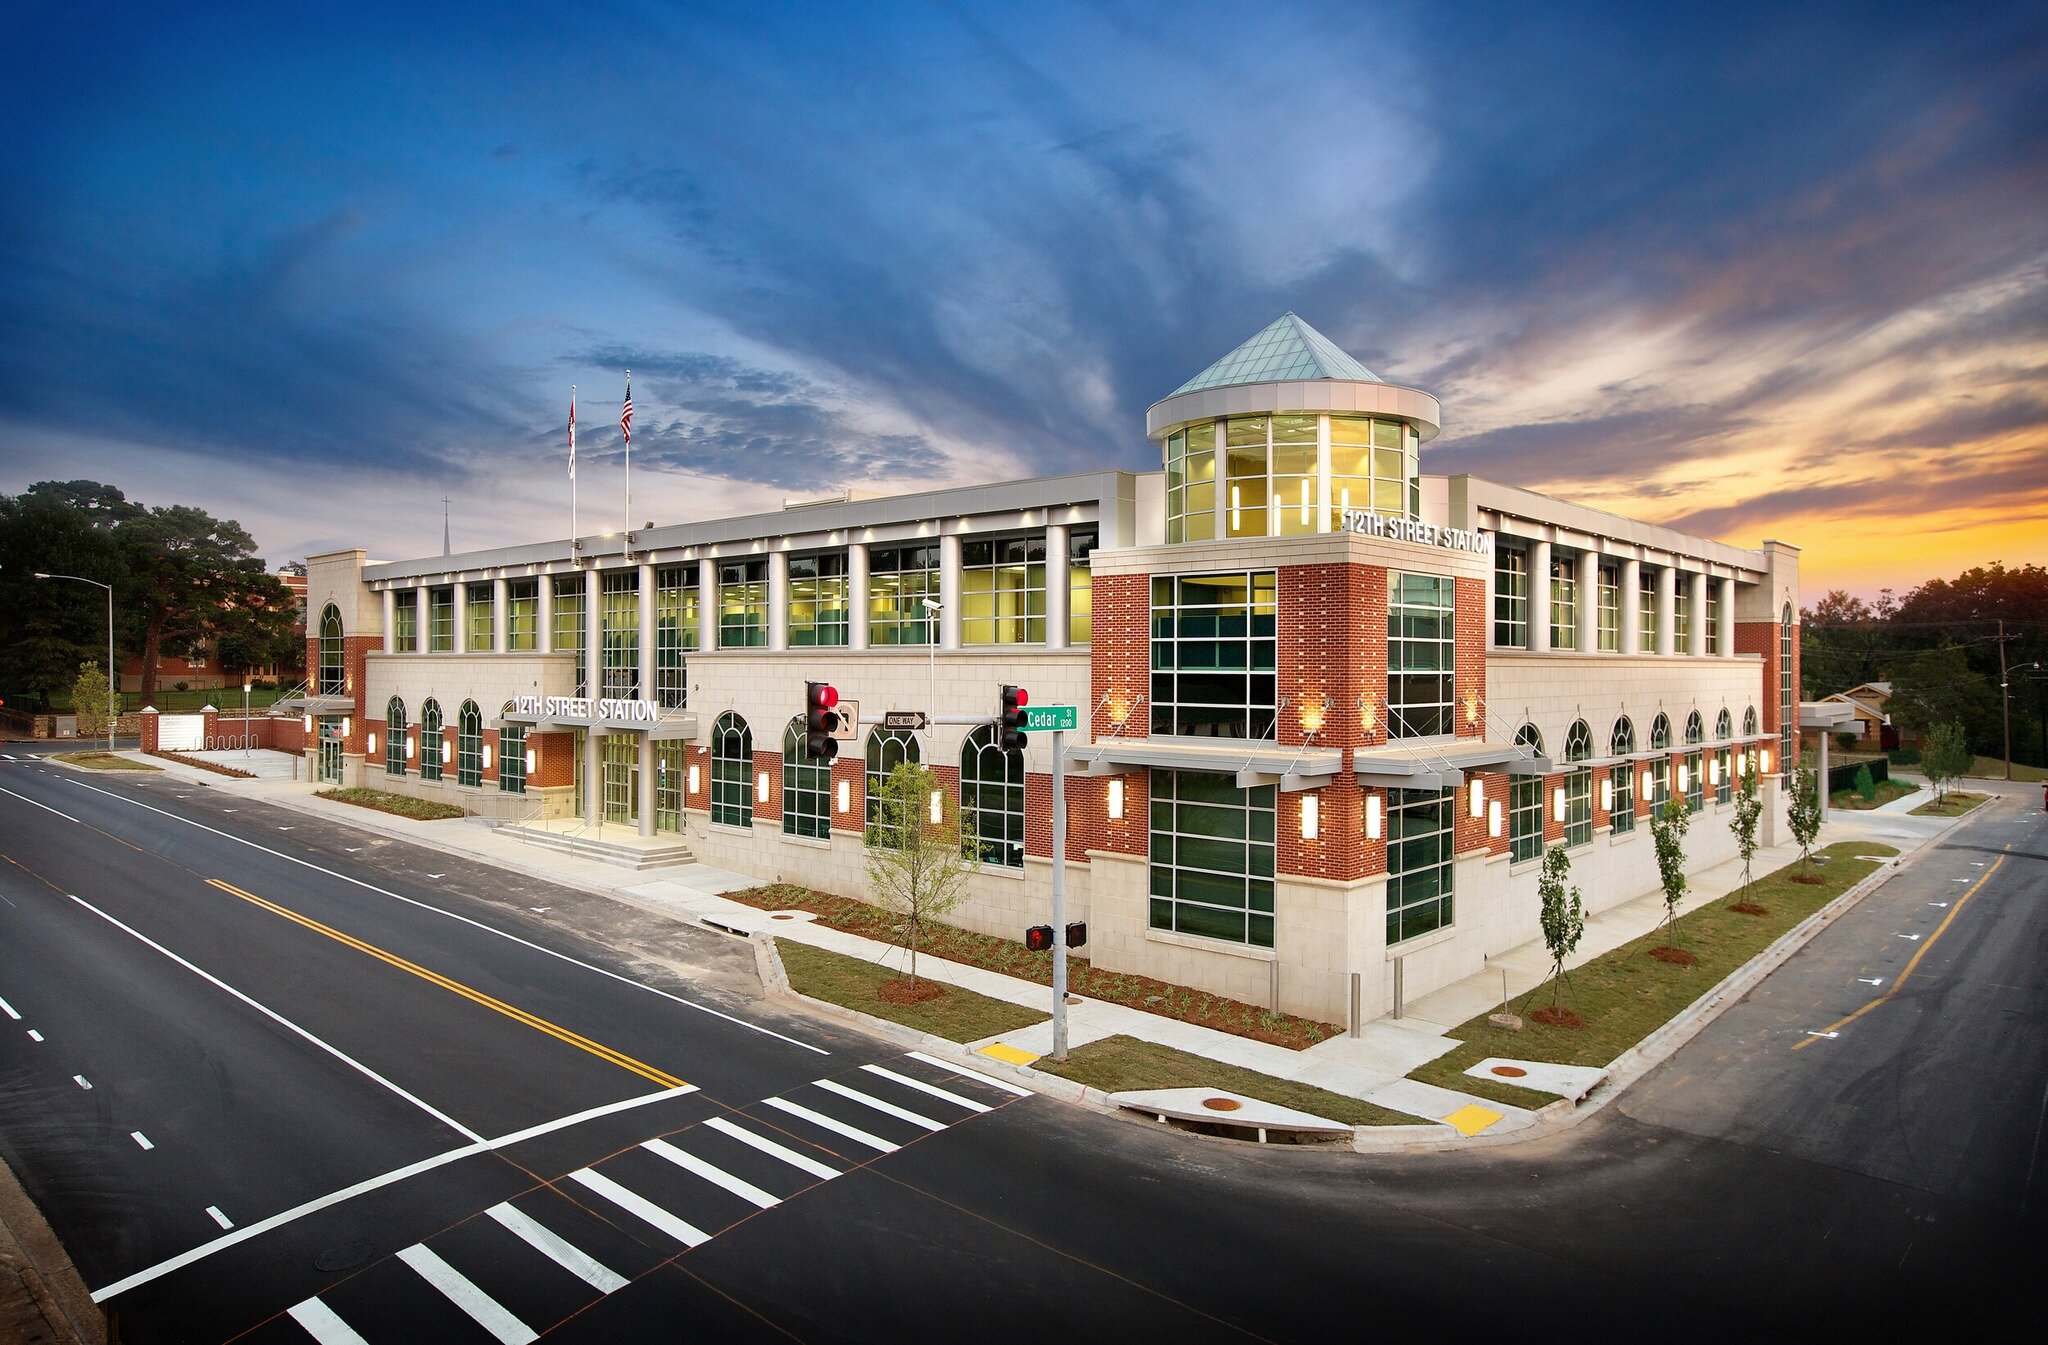 Here is a throwback to one of our past projects. The Little Rock Police Department was designed as part of the 12th Street Corridor Revitalization Project. The building encompasses an entire city block and was a new substation for 12th Street neighbo